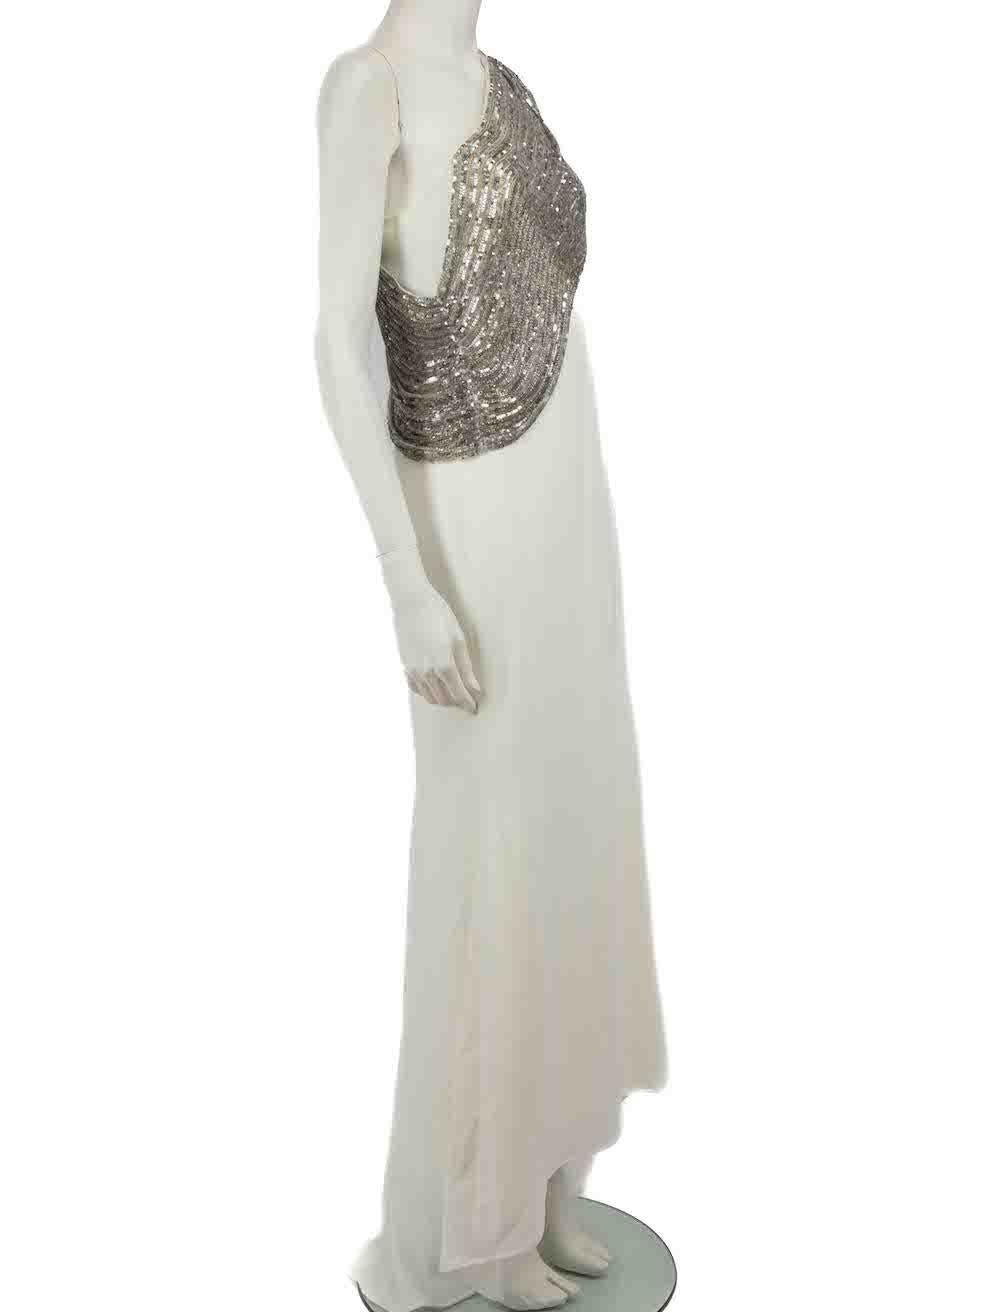 CONDITION is Very good. Minimal wear to dress is evident. Minimal wear to the front with a small mark and the composition label has been removed on this used Badgley Mischka designer resale item.
 
 Details
 White
 Synthetic
 Maxi gown
 One